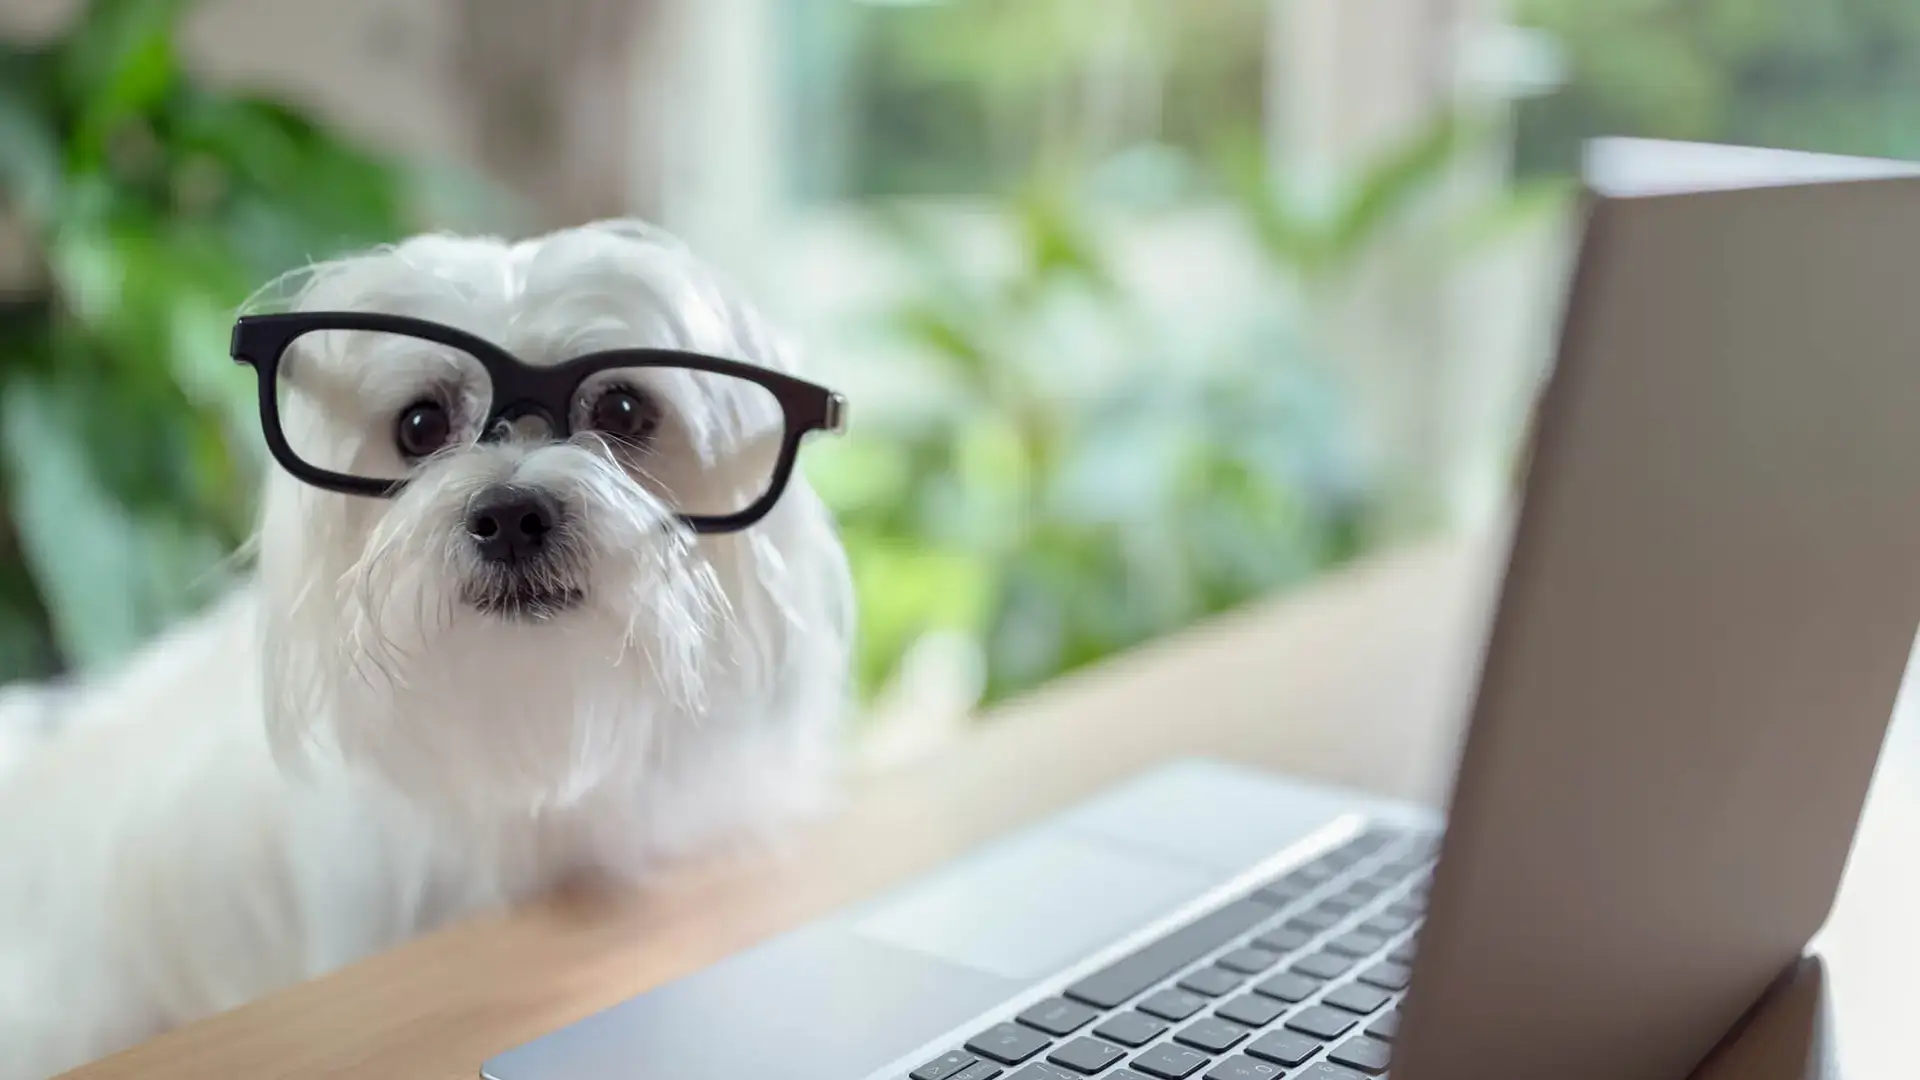 A white terrier with glasses on sat at a desk looking at a laptop